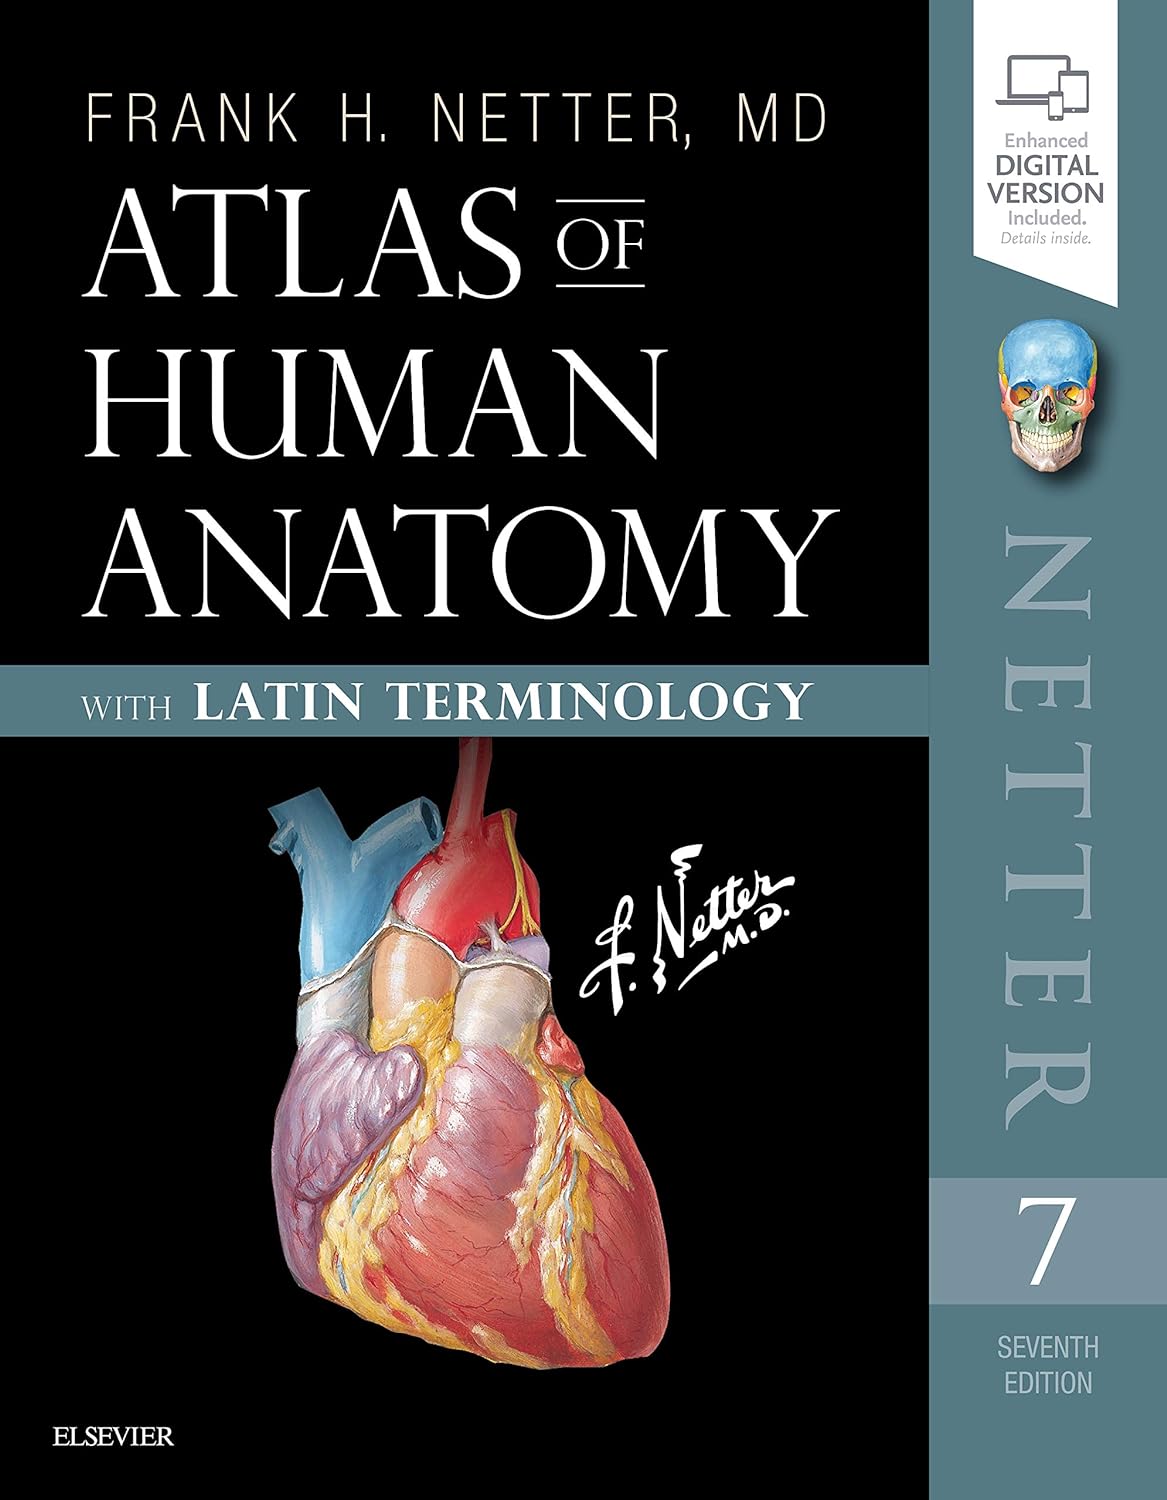 Atlas of Human Anatomy: Latin Terminology: English and Latin Edition (Netter Basic Science), 7th Edition by  Frank H. Netter MD